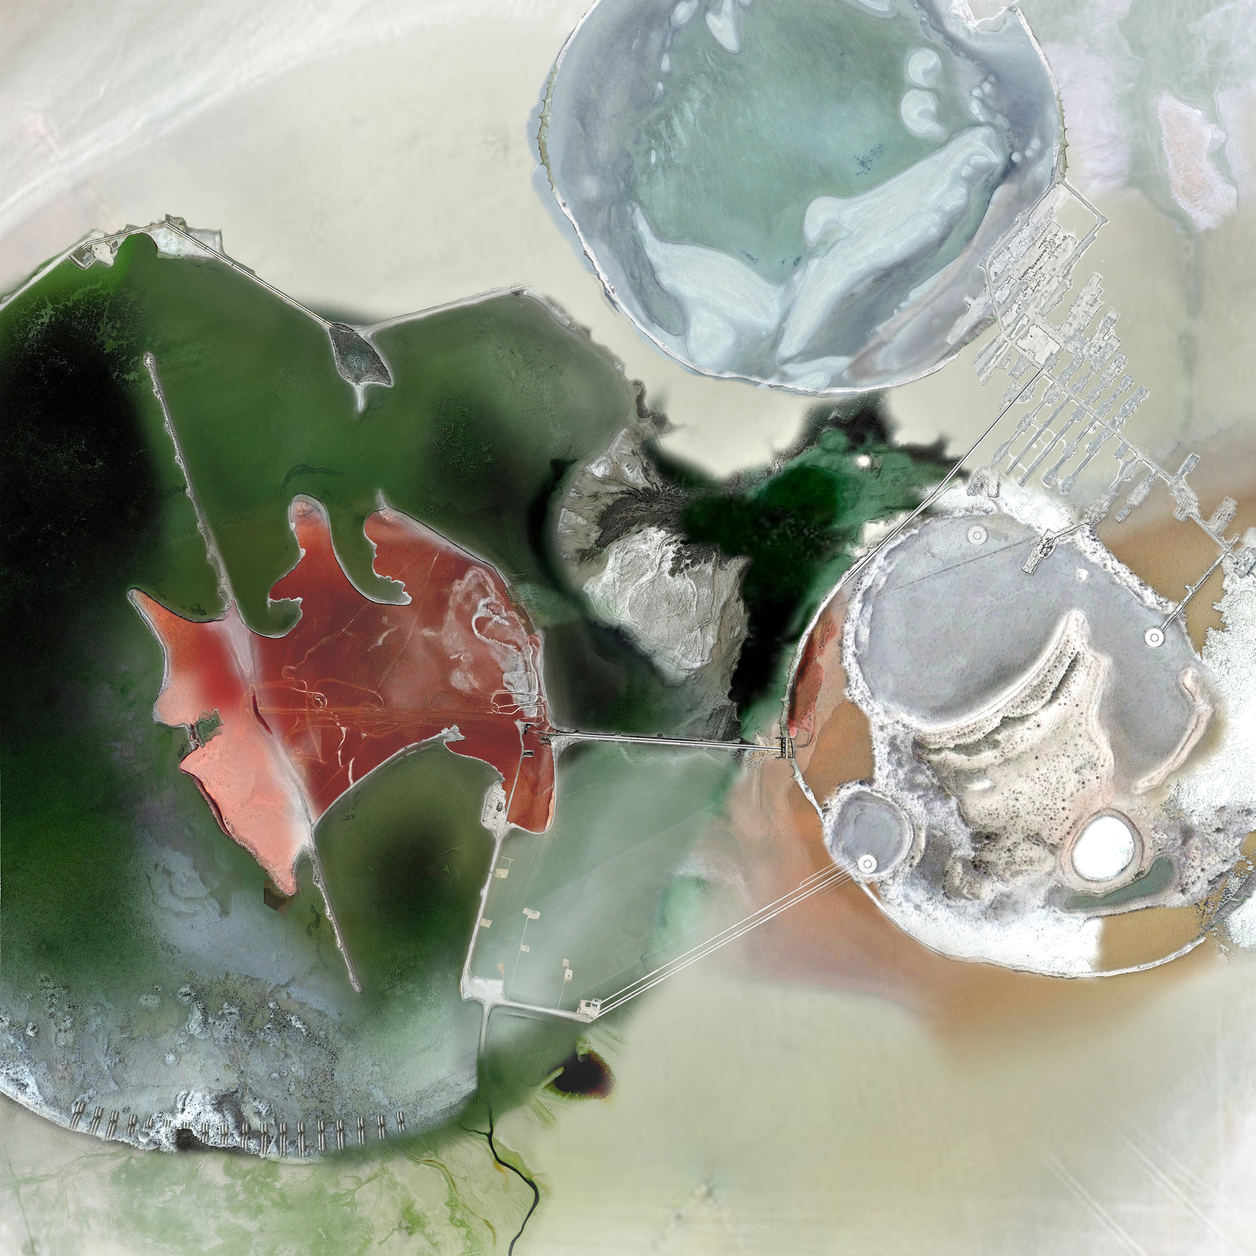 Brine figures with different salinities appears colors from green to red, creating painterly visual effects in order to estrange